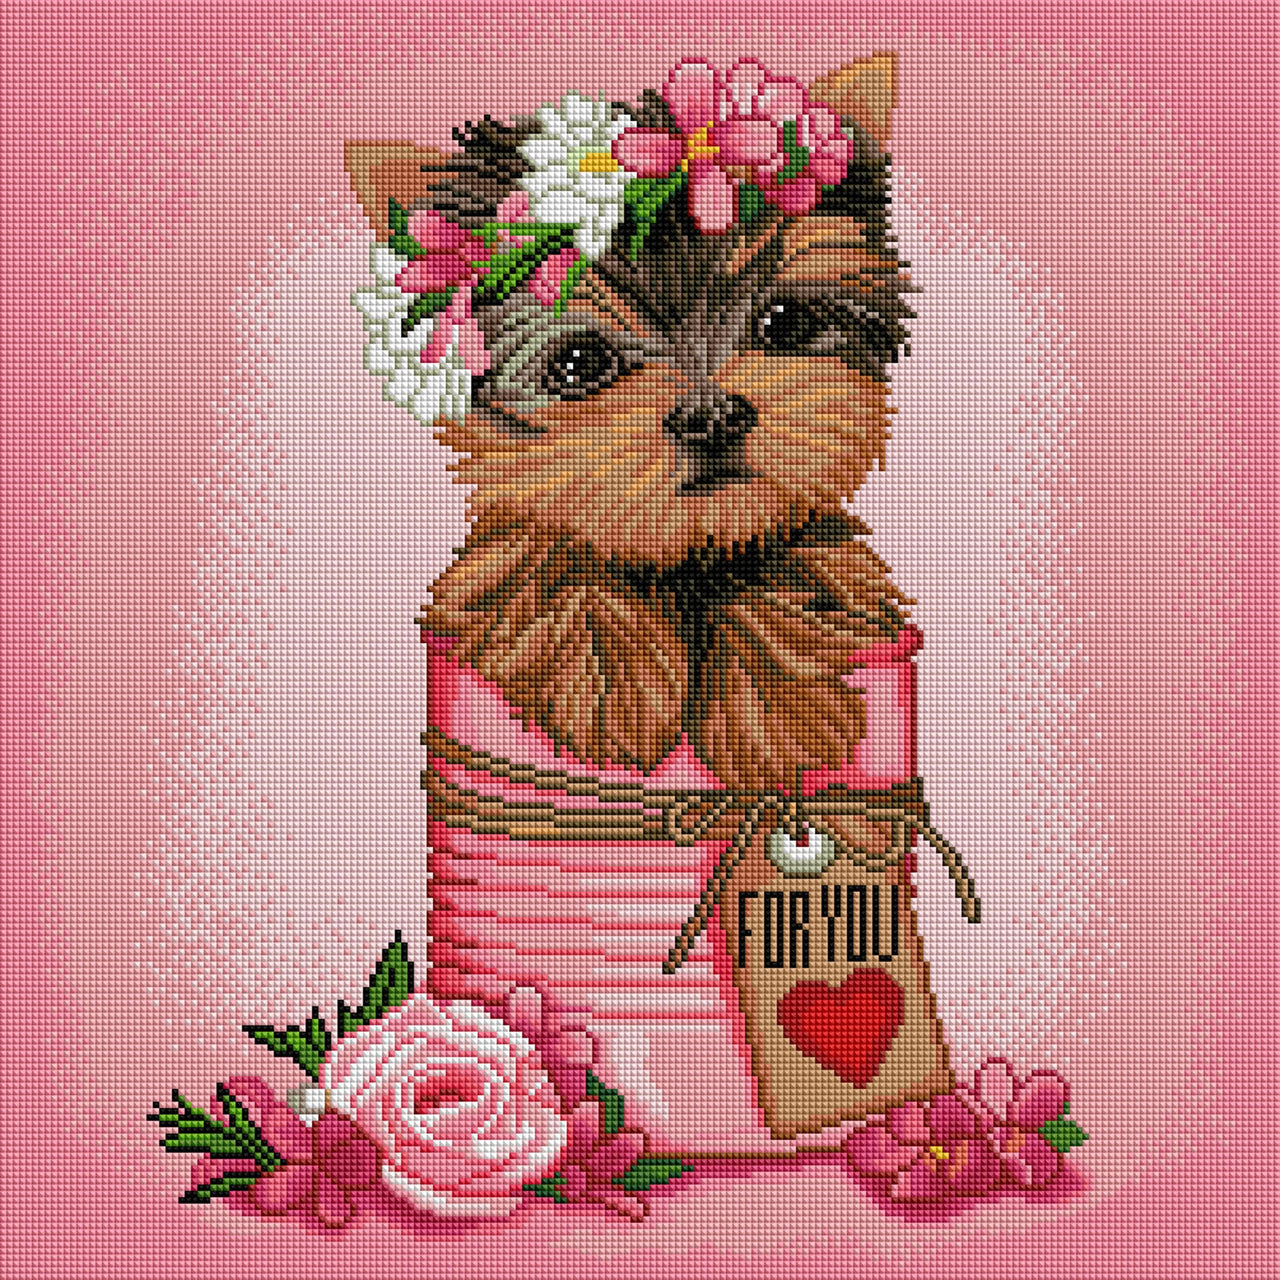 Diamond Painting Floral Yorkie Puppy 20" x 20" (51cm x 51cm) / Square with 36 Colors including 4 ABs / 40,401